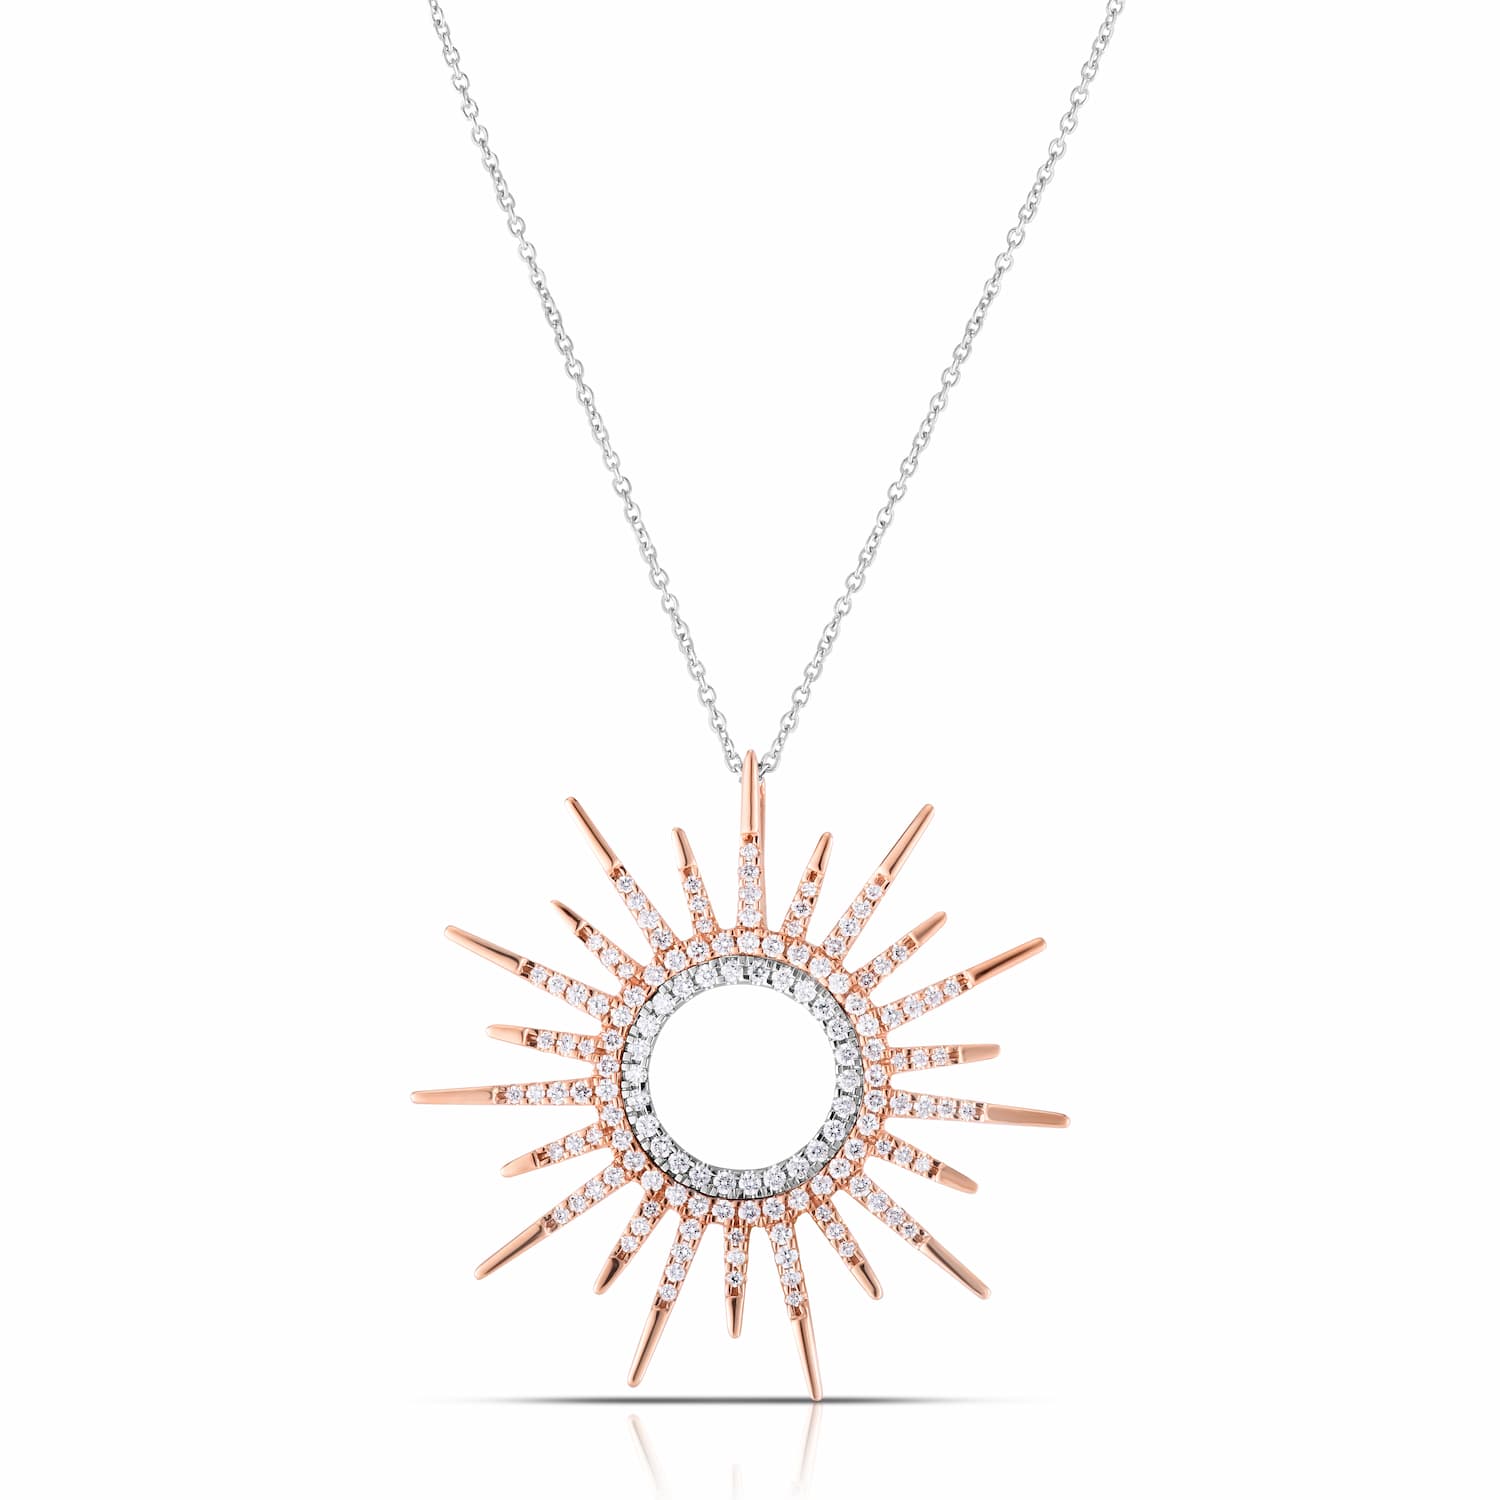 Roberto Coin 18K Rose Gold Diamond and Sapphire Necklace - 16KG1A